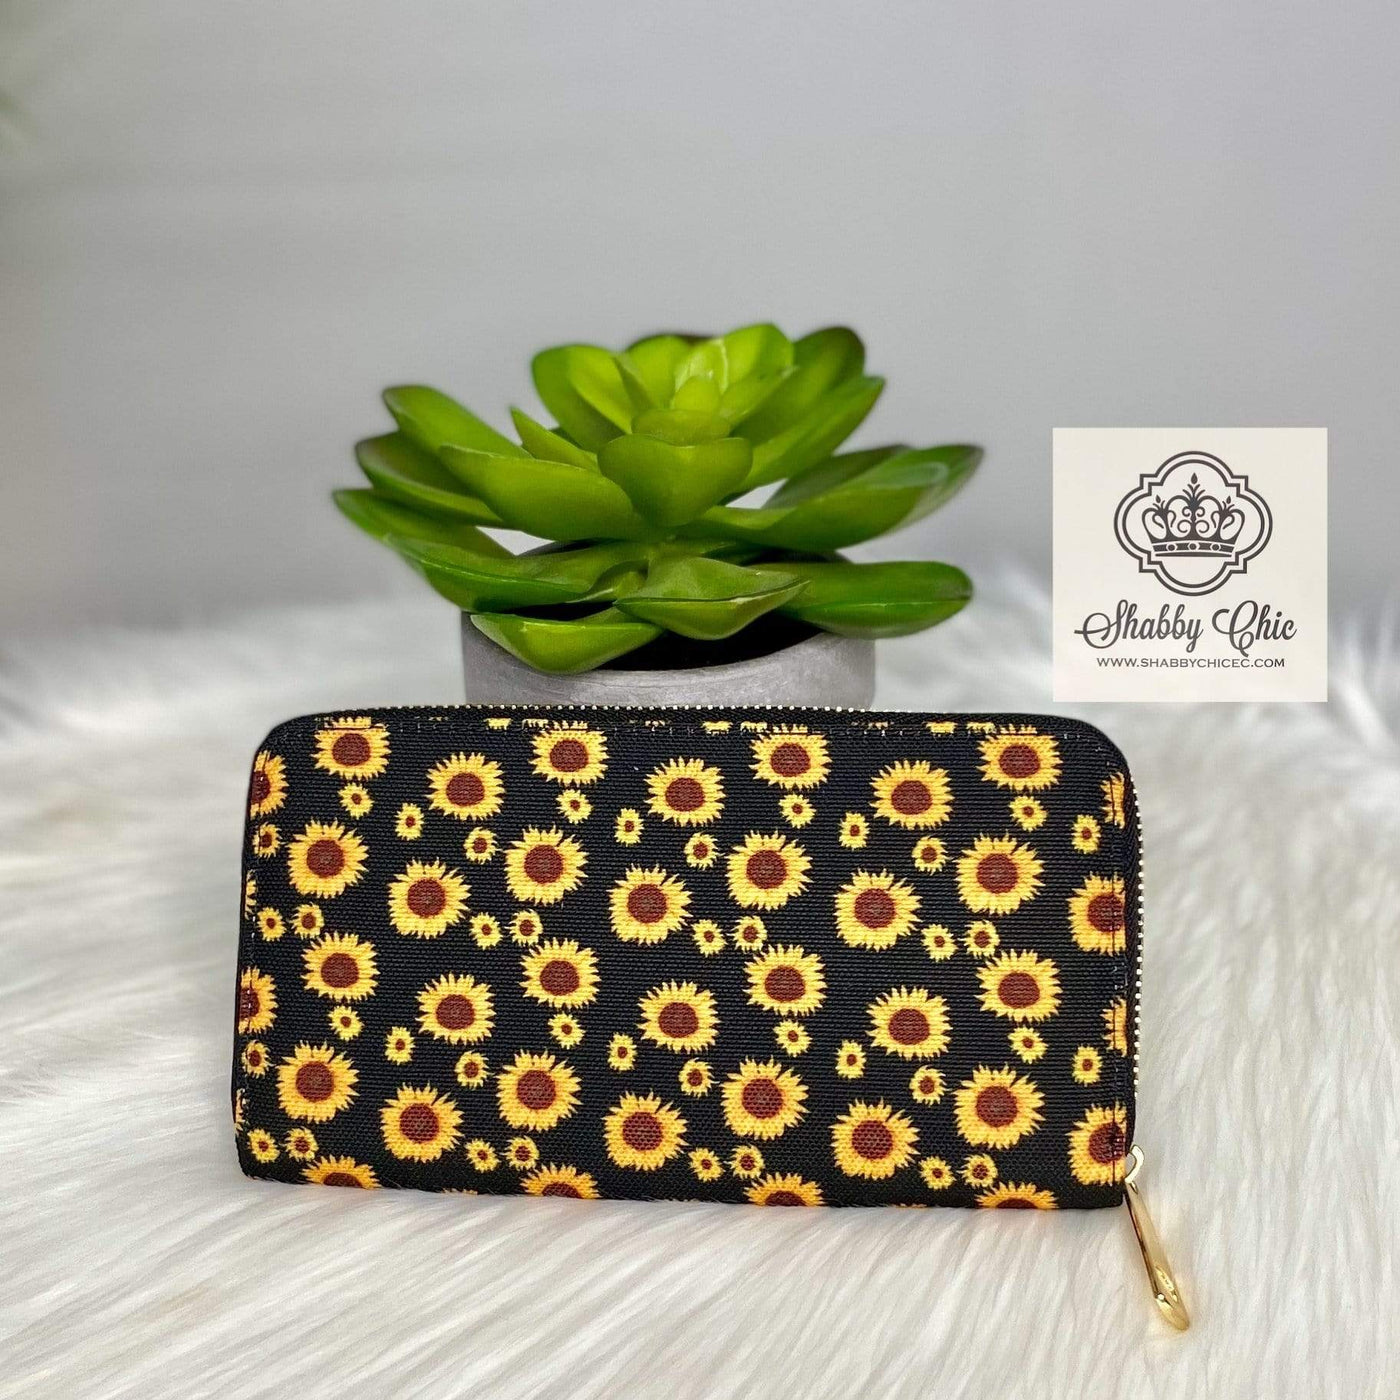 Sunflower Zip Wallet Shabby Chic Boutique and Tanning Salon